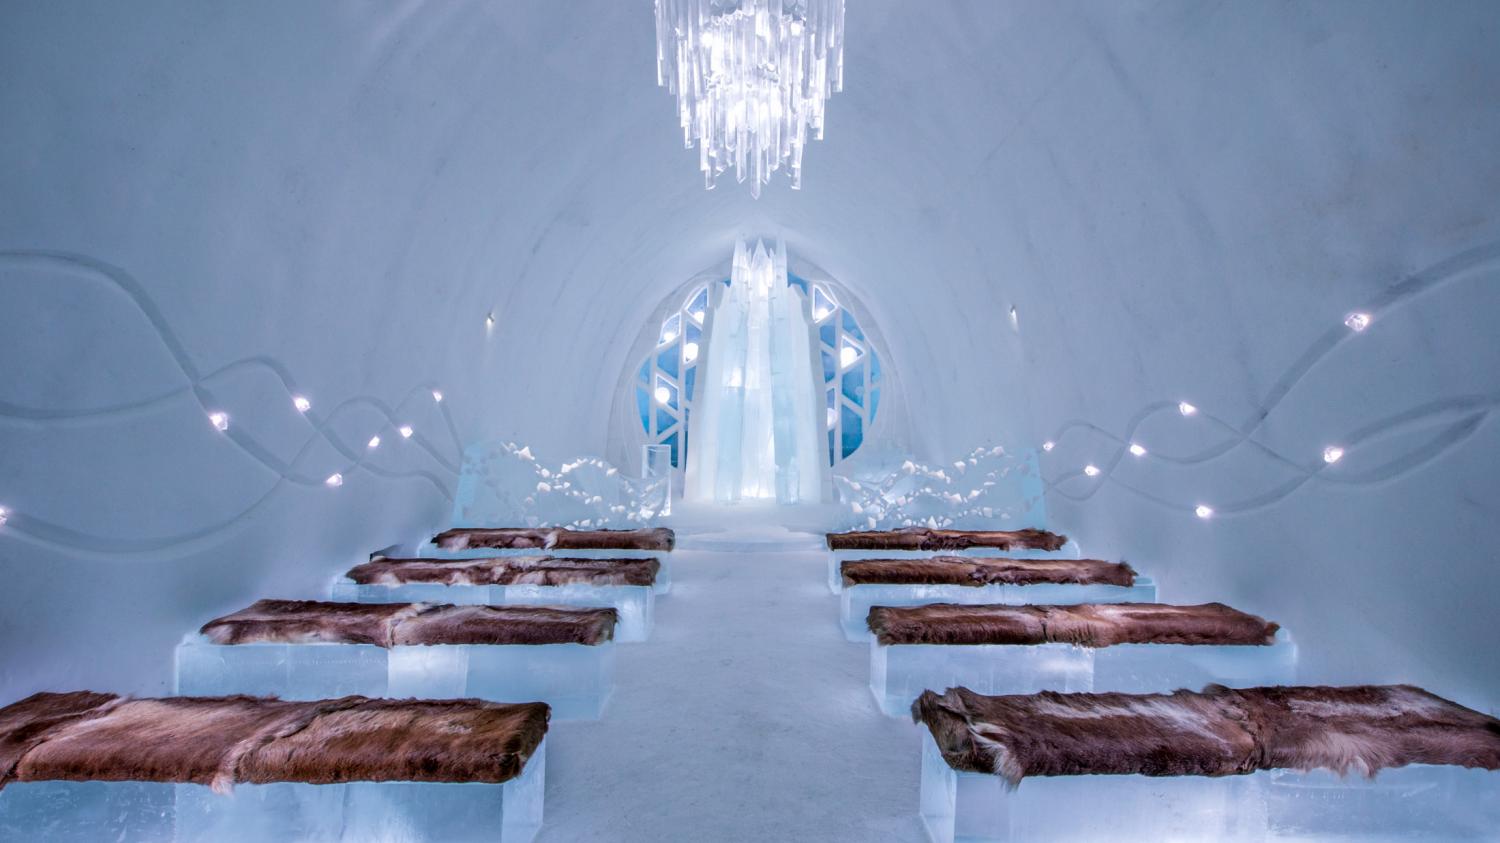 The ice ceremony hall is the perfect venue for an intimate winter wonderland wedding/